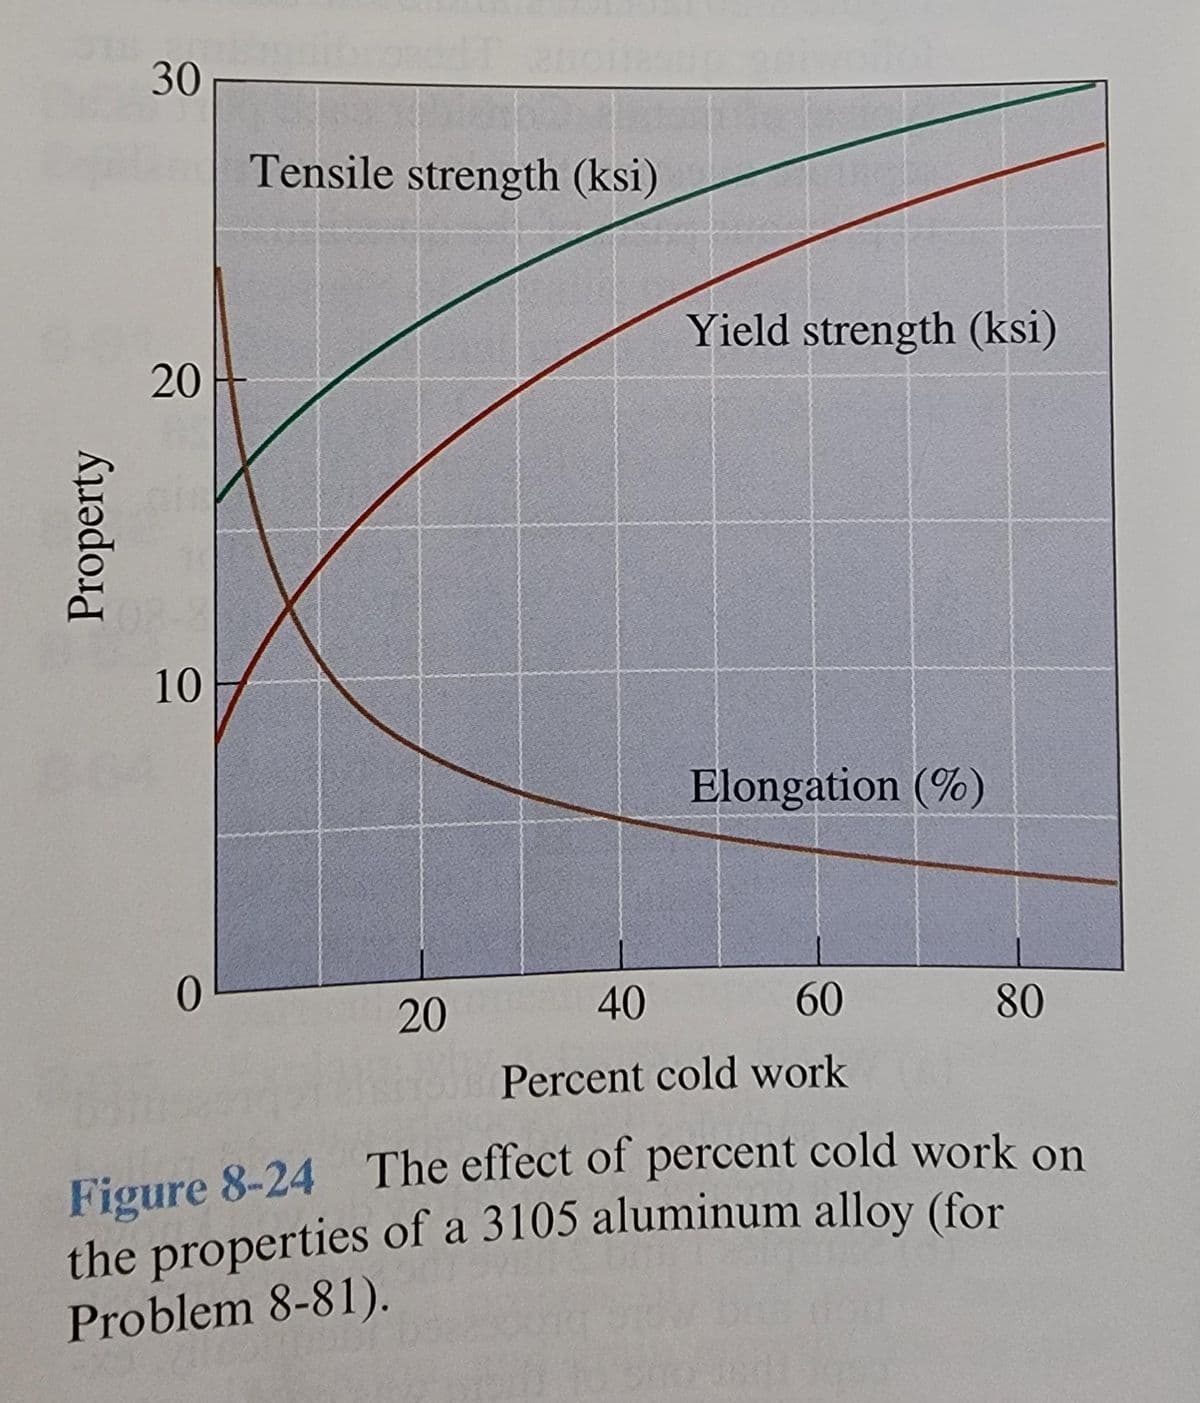 Property
30
20
10
0
Tensile strength (ksi)
20
Yield strength (ksi)
Elongation (%)
40
60
Percent cold work
80
Figure 8-24 The effect of percent cold work on
the properties of a 3105 aluminum alloy (for
Problem 8-81).